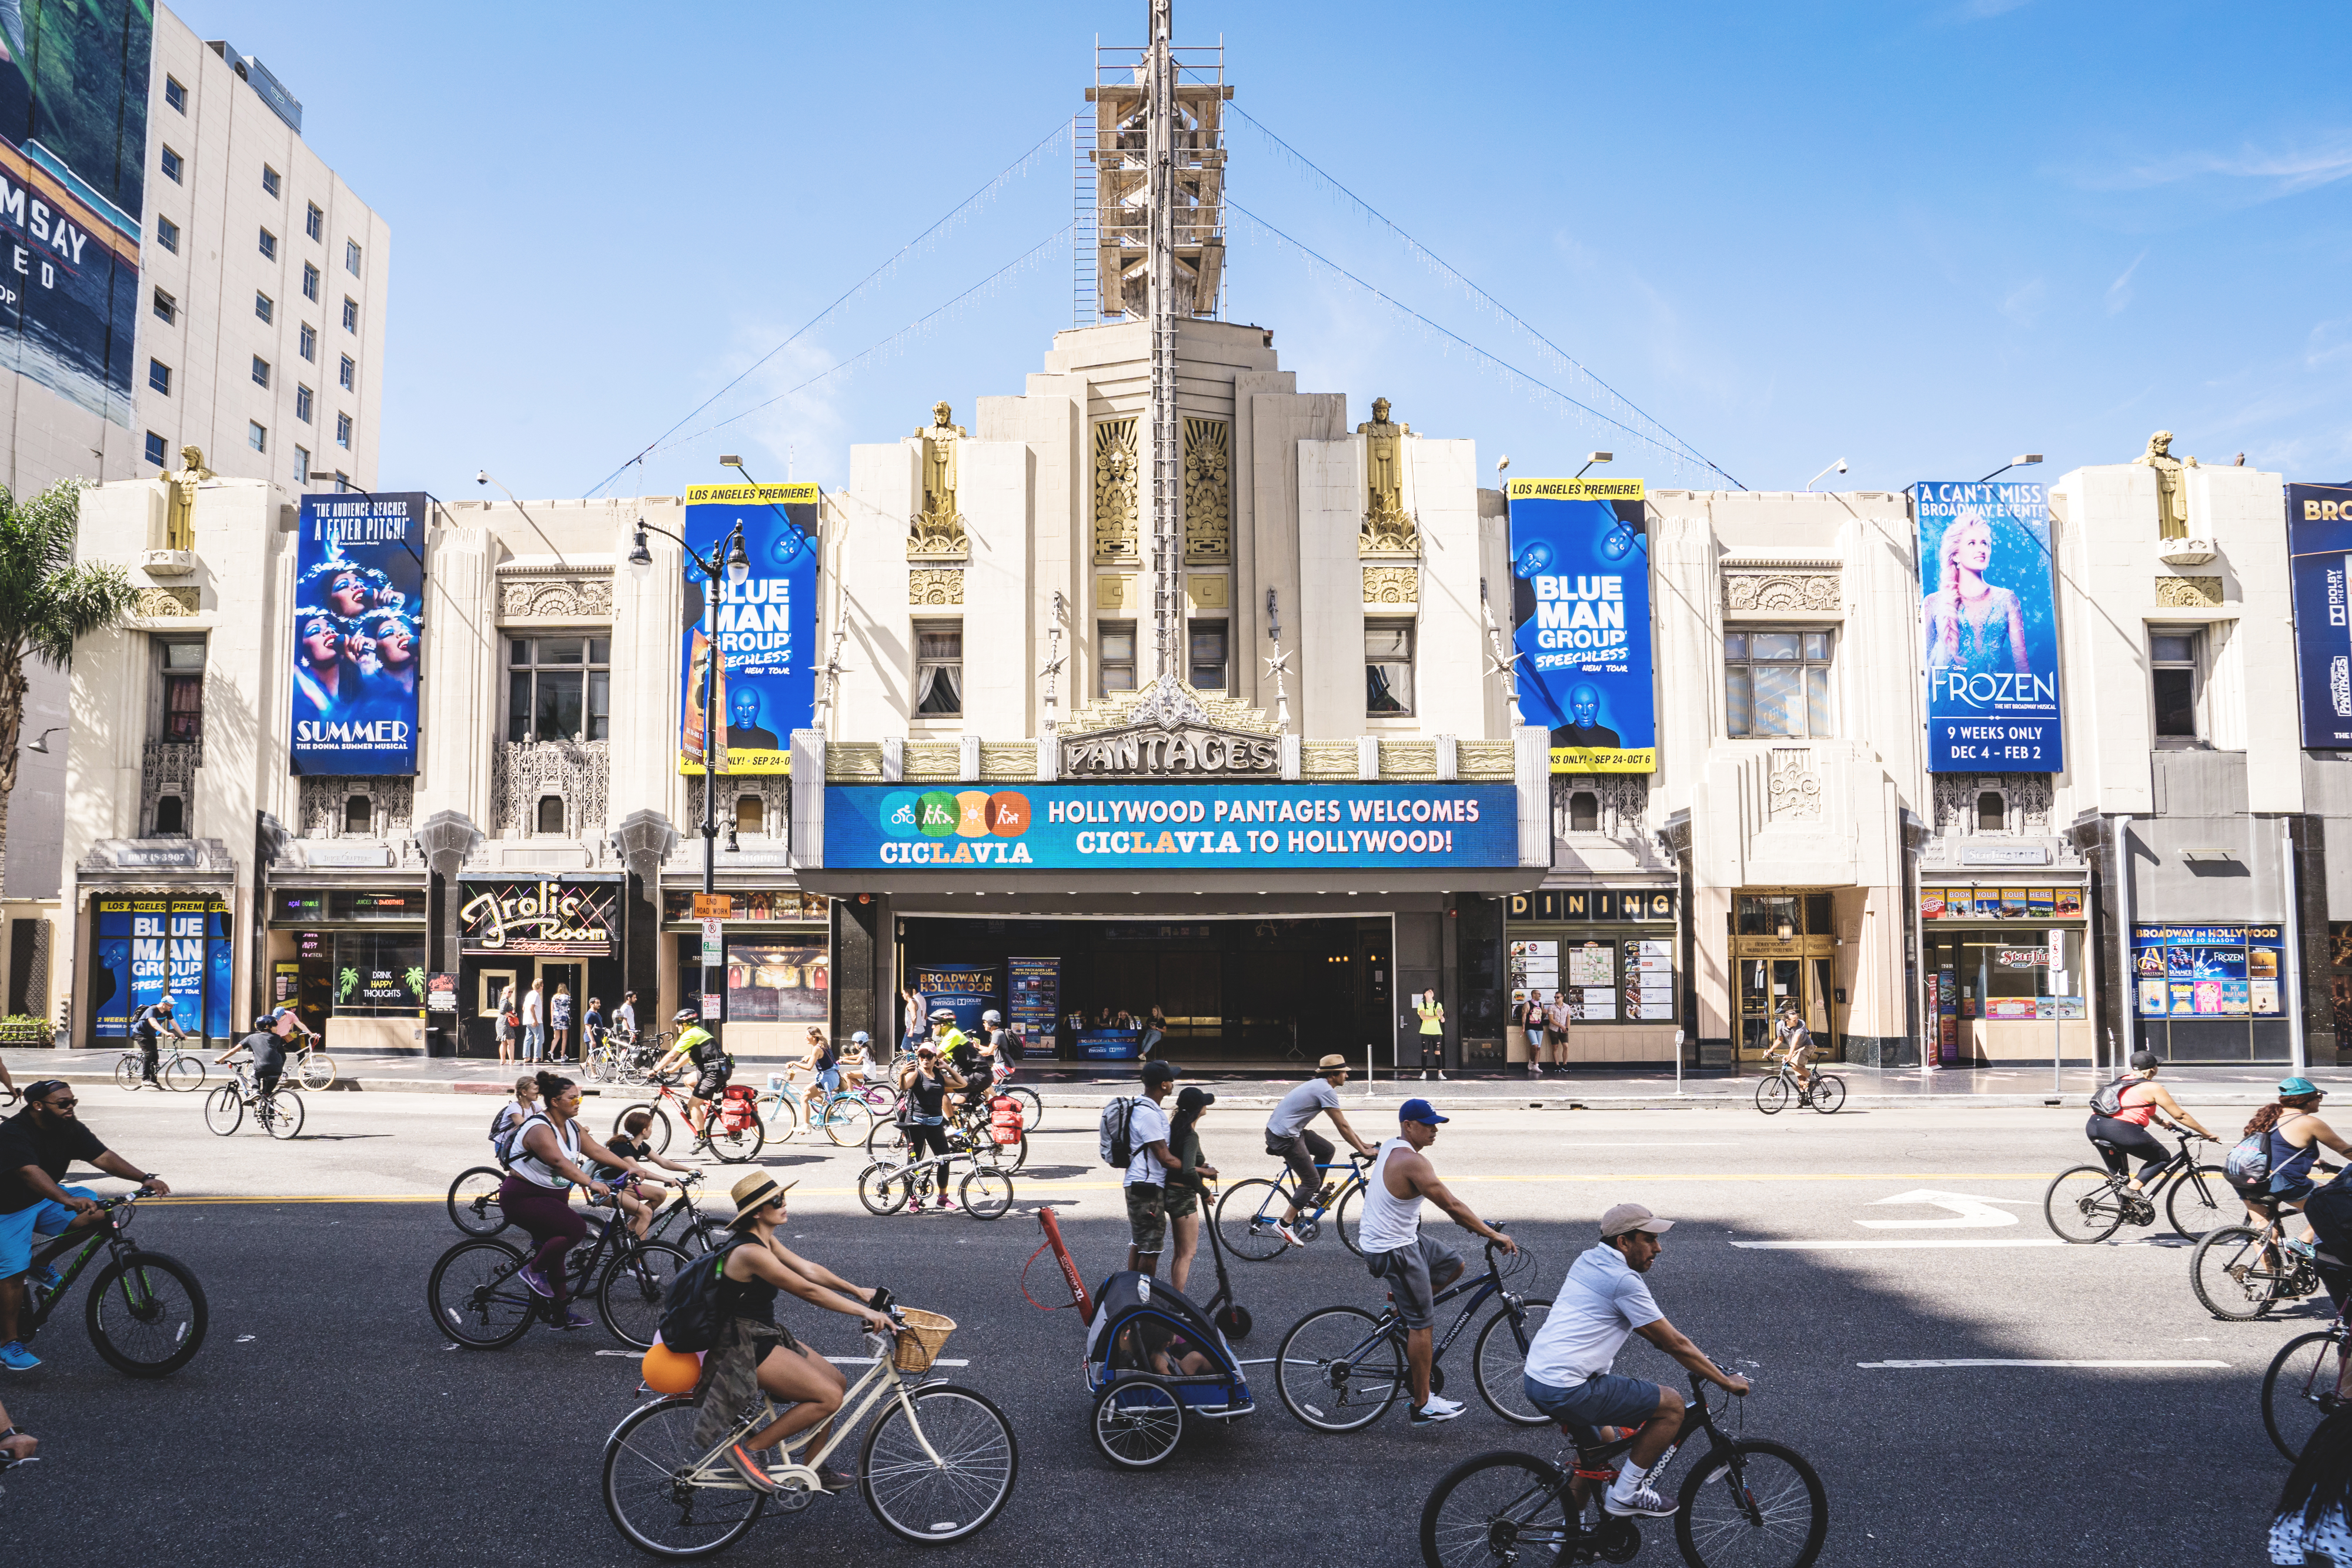 People ride bikes and walk in the street in front of an ornate theater as part of an open streets event in Hollywood.